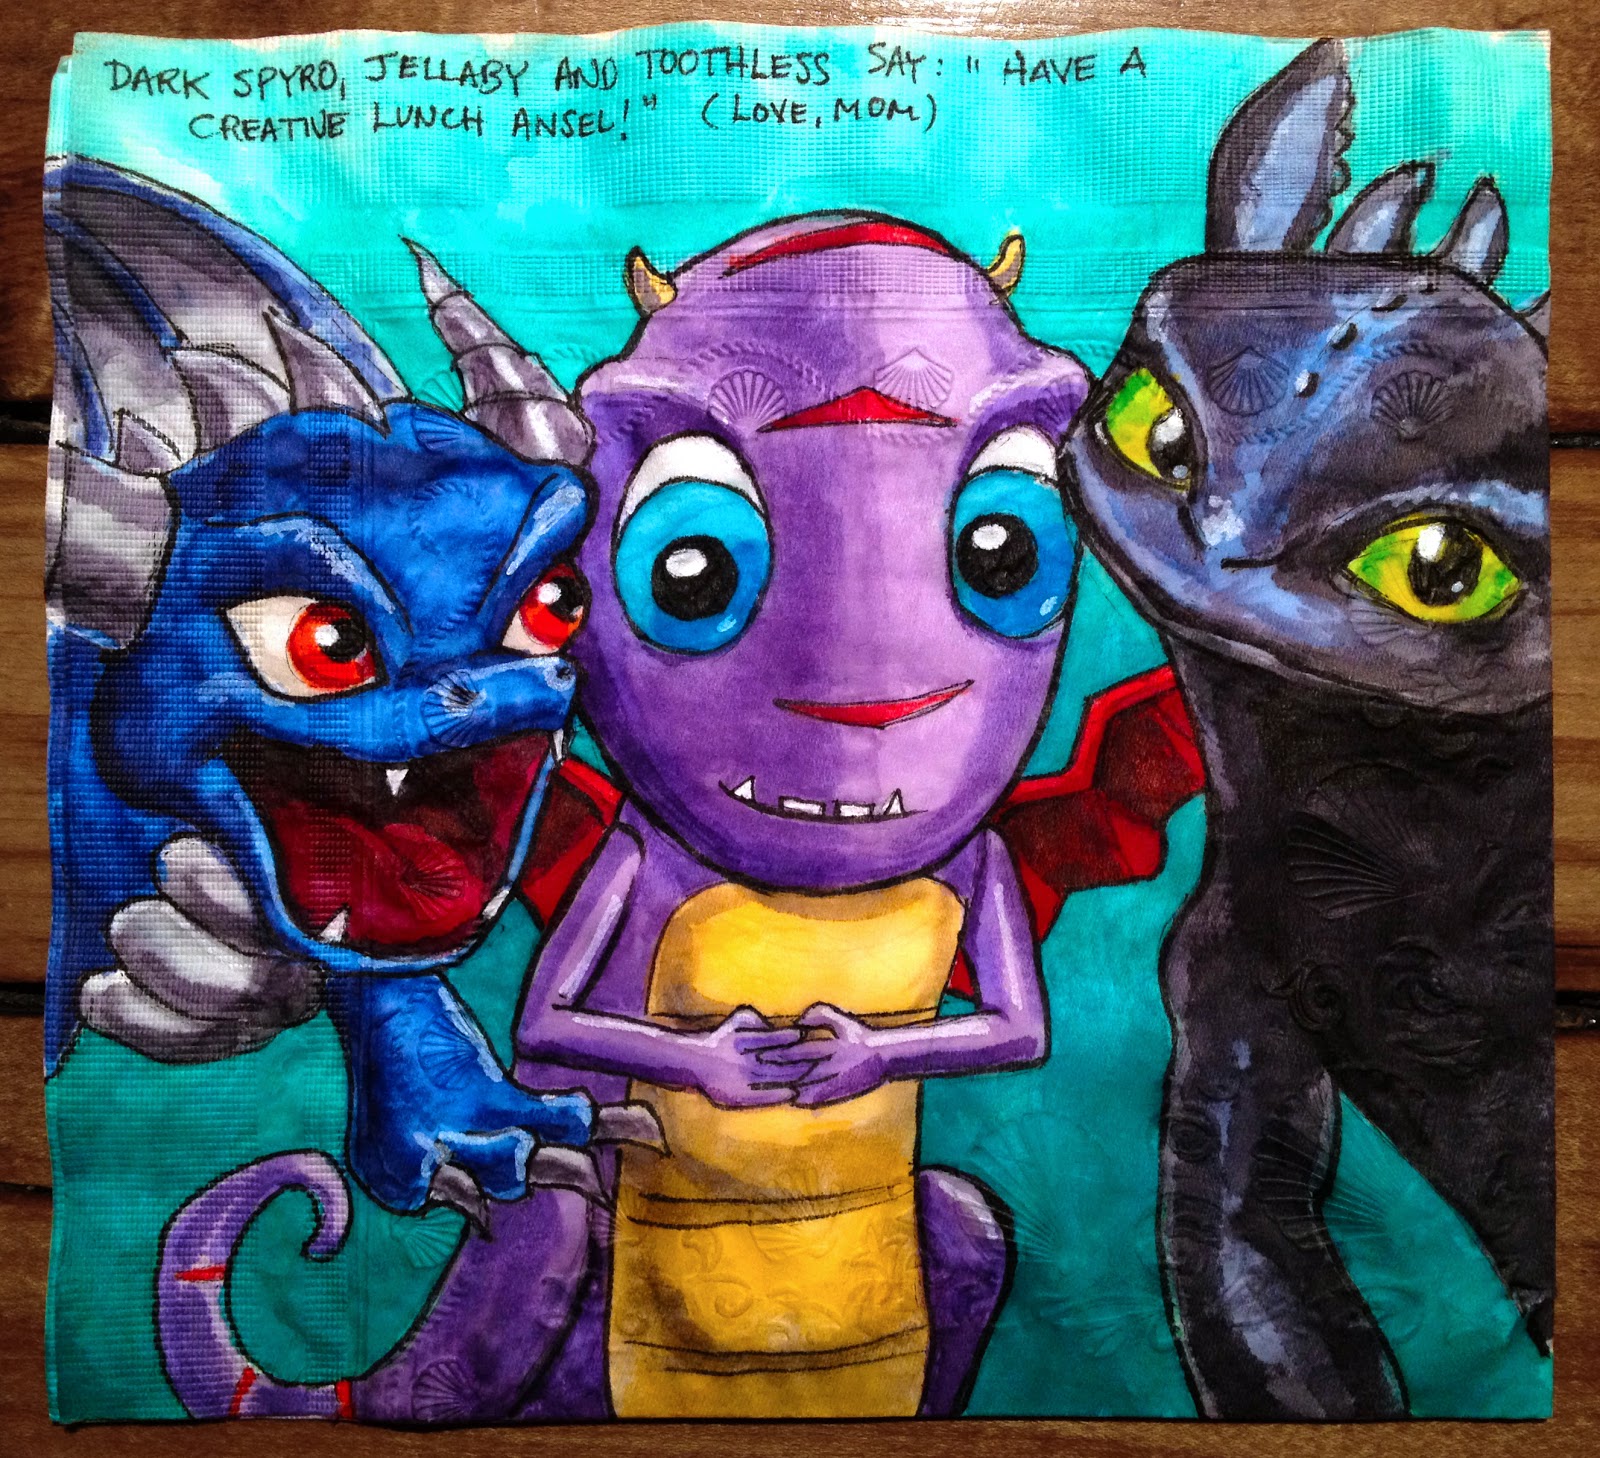 painting - Dark Spyrd, Jellaby Aj Toothless Say Have A Creative Lunch Ansel!" Love, Mom